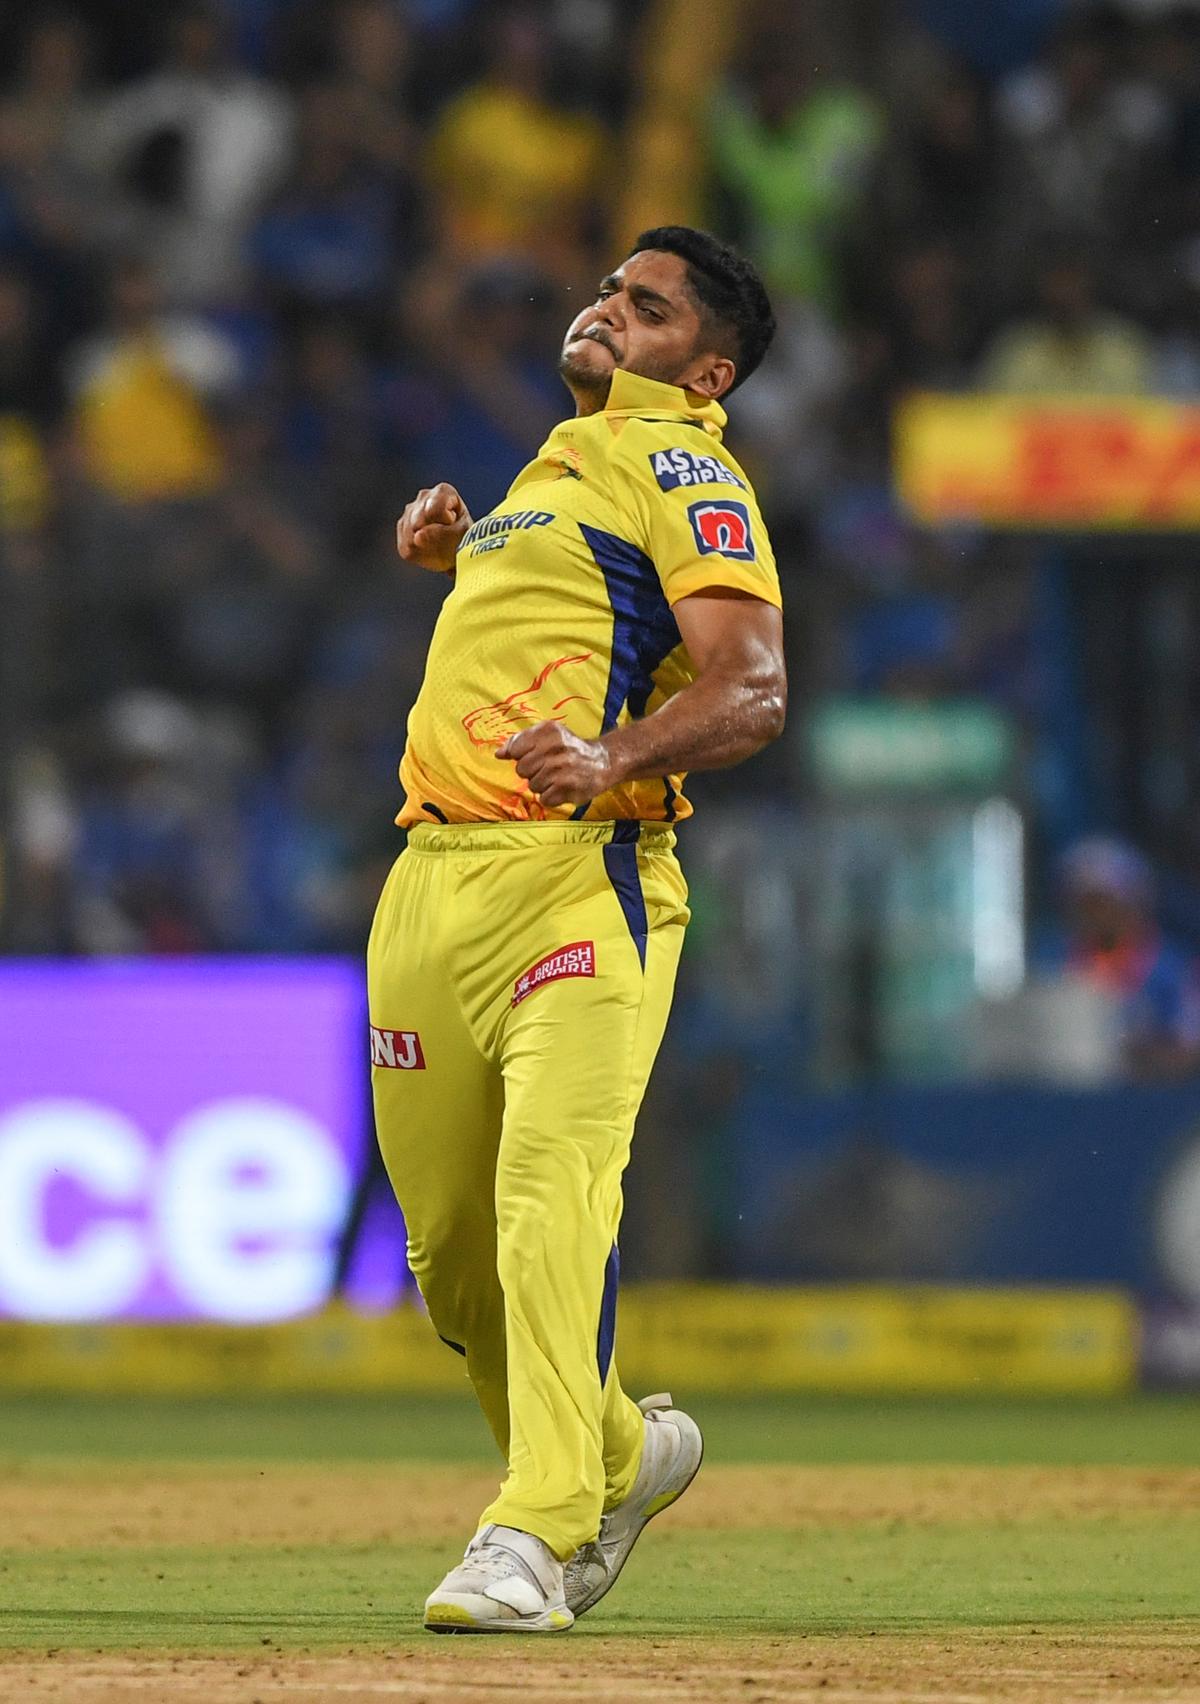 Acing tough overs: The Chennai think-tank entrusted Tushar Deshpande with new-ball duties, and he did not let them down. And as the season progressed, Deshpande improved in the slog overs as well.